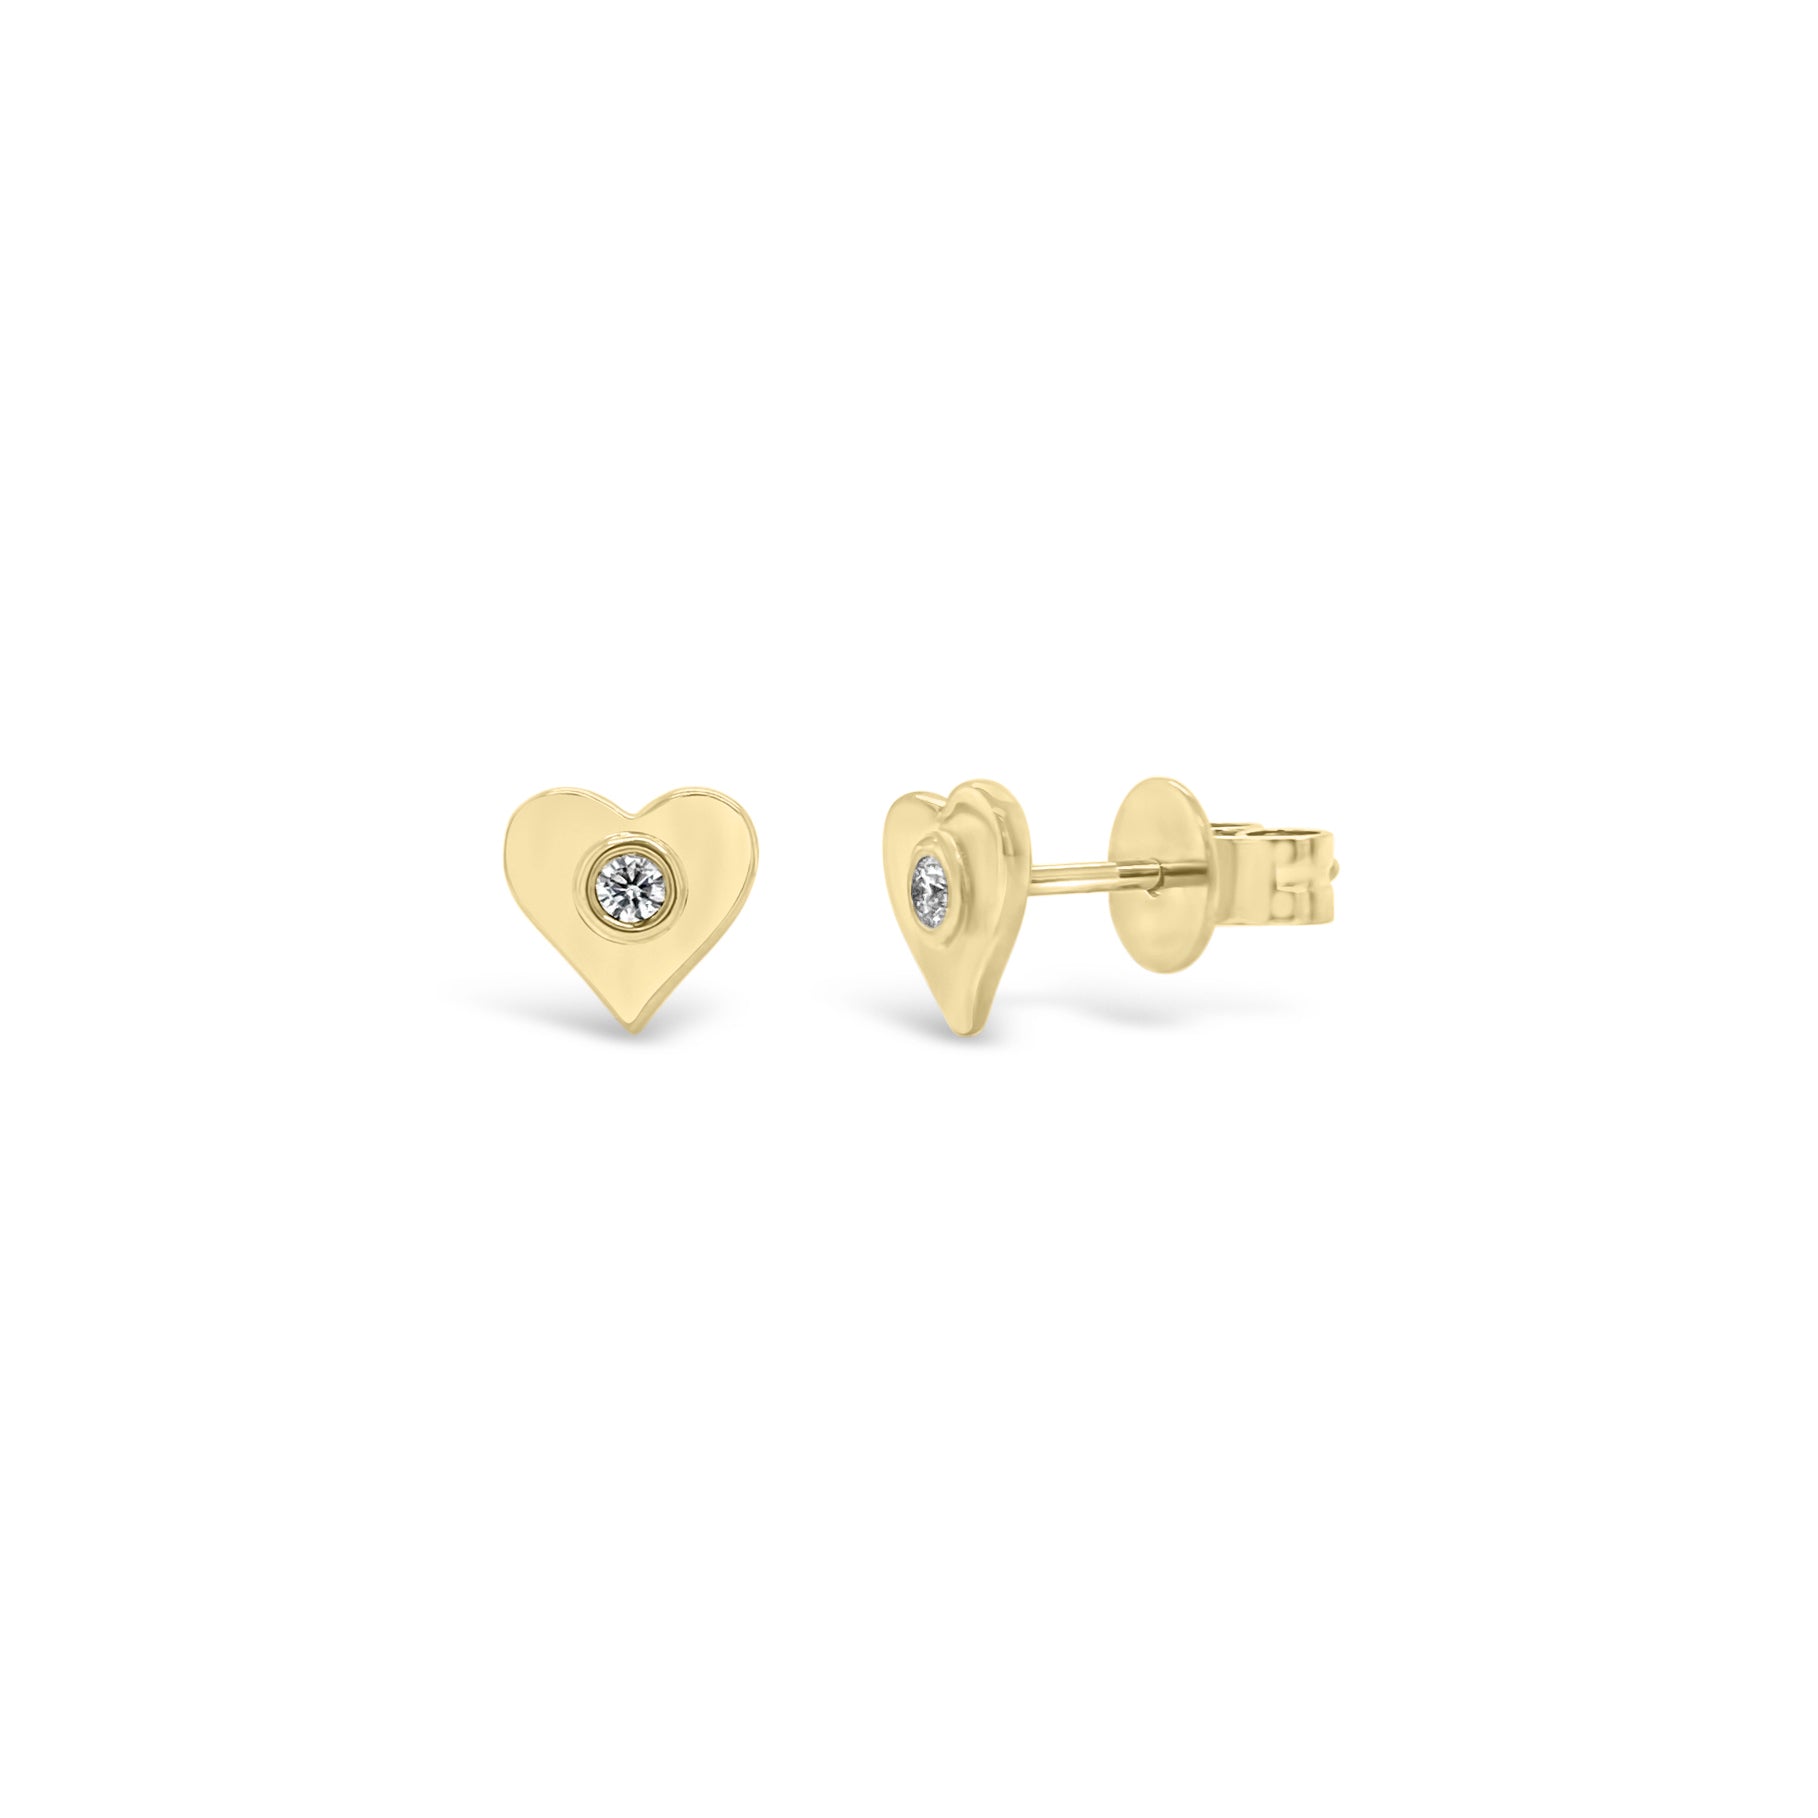 Gold Heart Stud Earrings with Diamond Centers - 14K yellow gold weighing 1.33 grams - 2 round diamonds totaling 0.05 carats